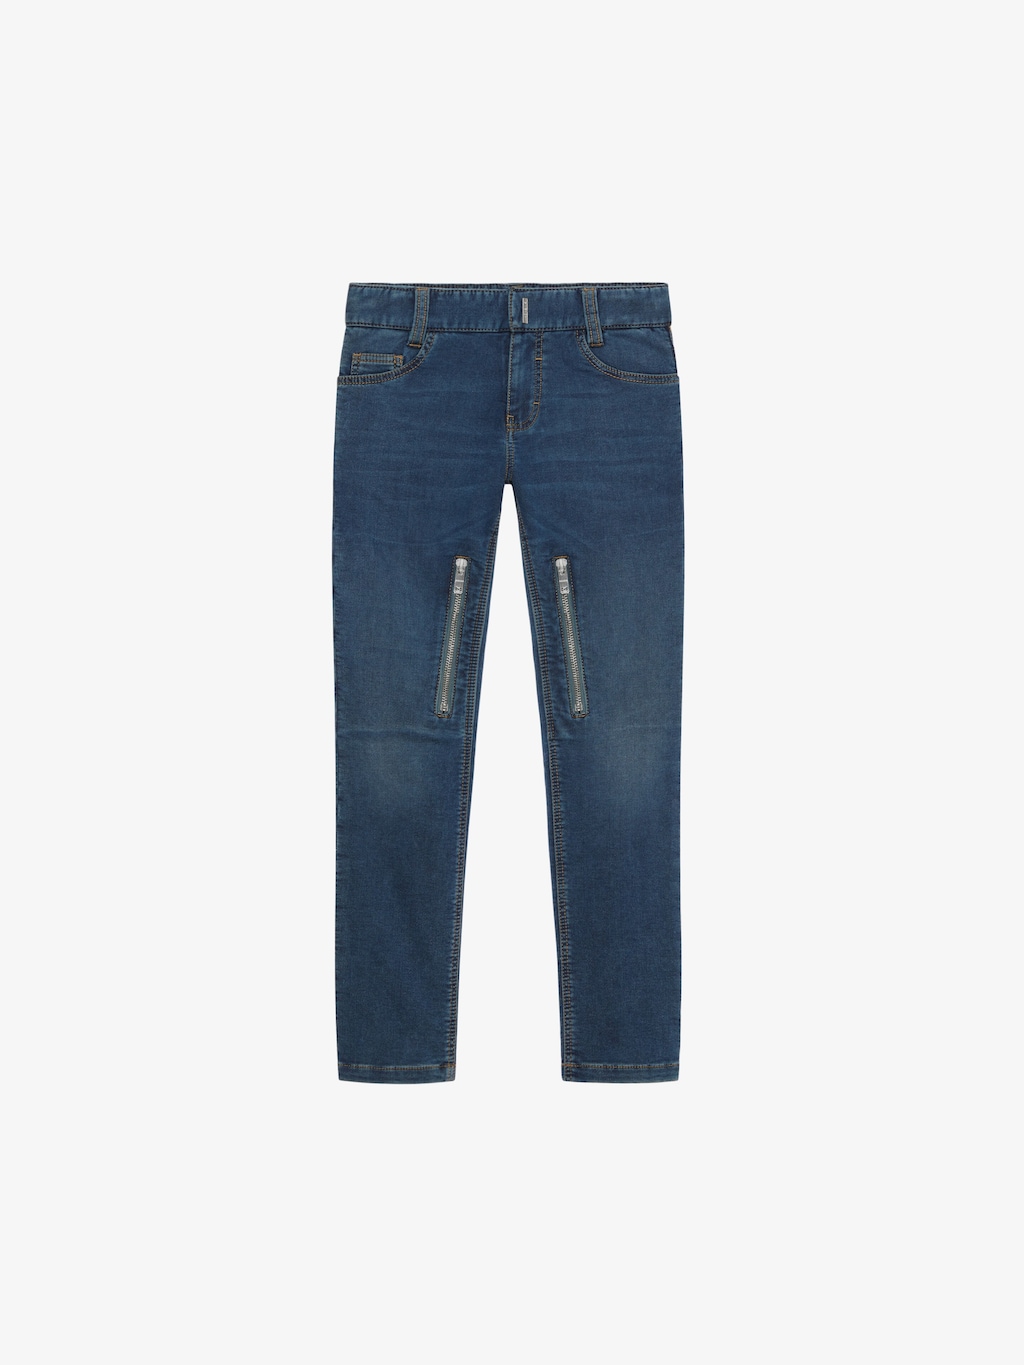 undefined | Slim fit jeans in denim effect duffle